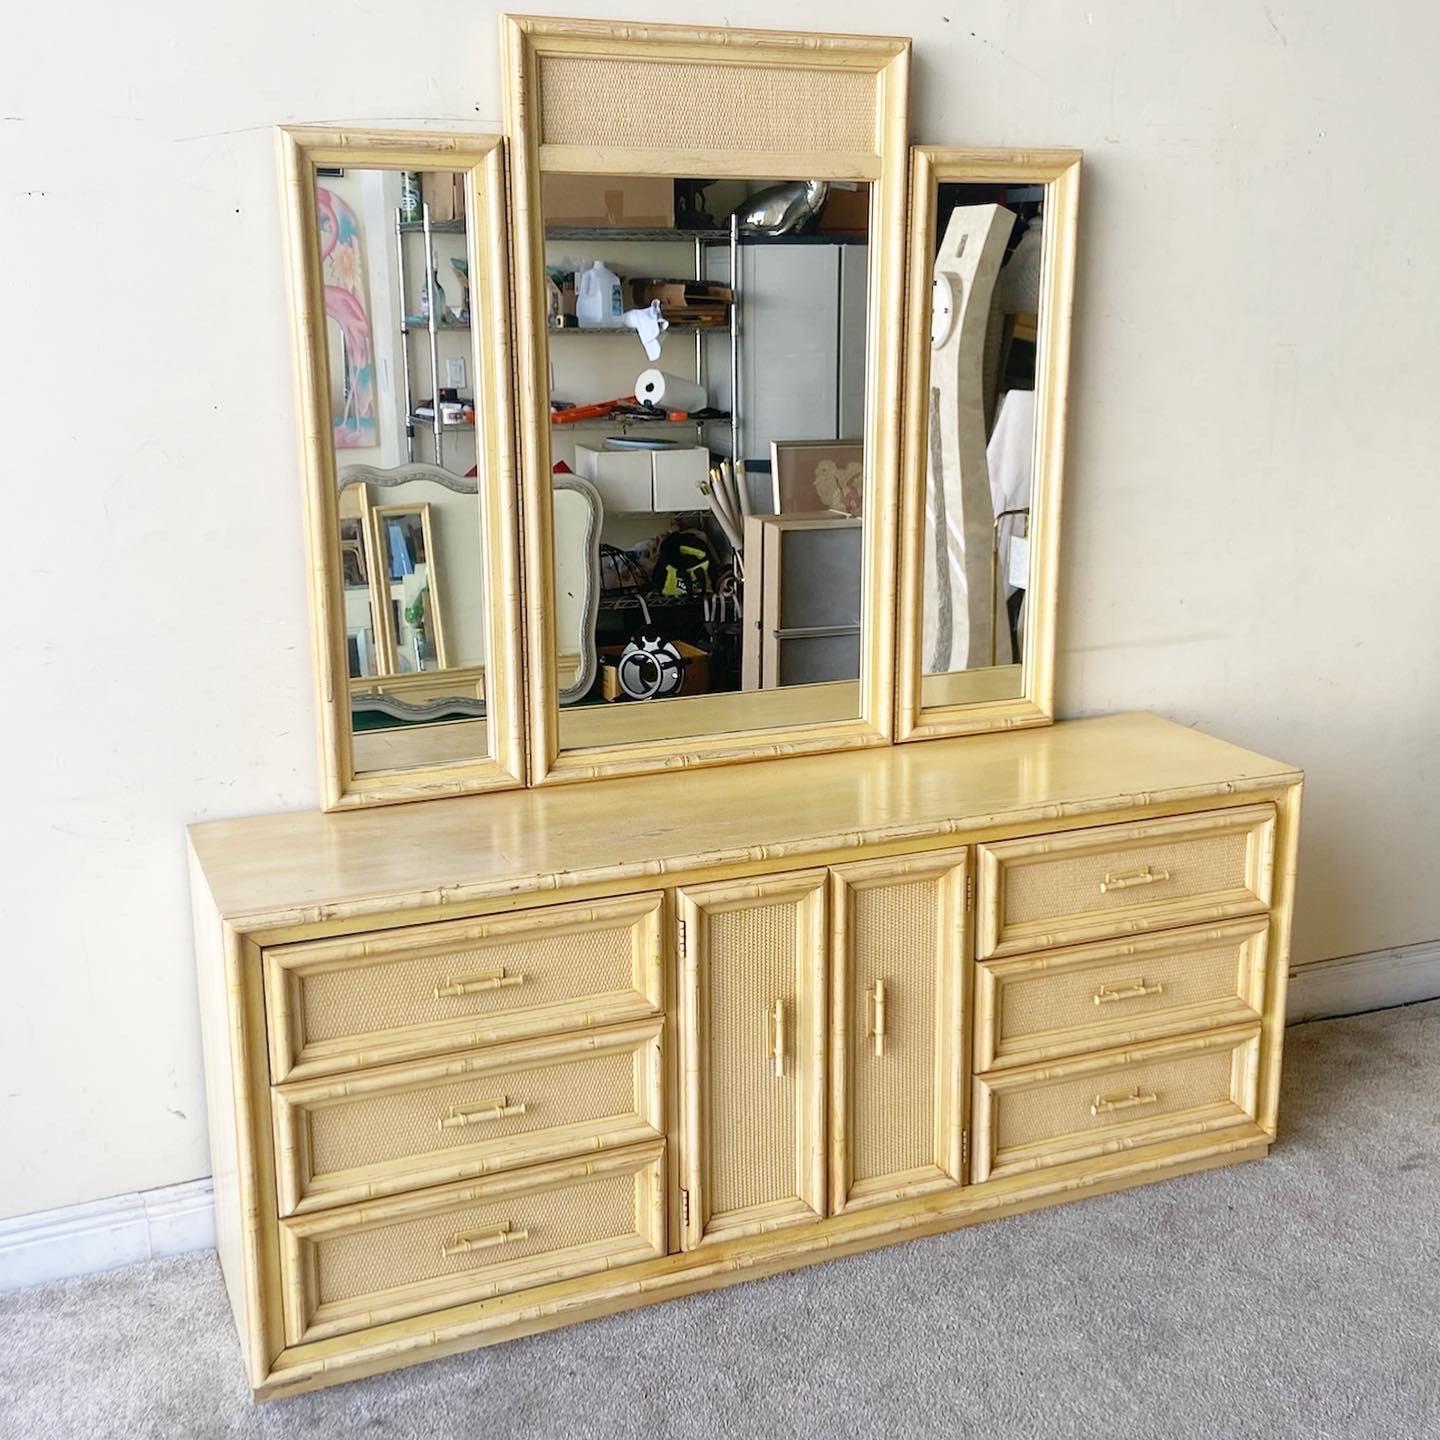 Exceptional vintage bohemian dresser with matching triple mirror. Features a cream/light yellow finish with faux bamboo framing and drawer pulls.

Mirror measures 55” W, 1.5” D, 48” H.